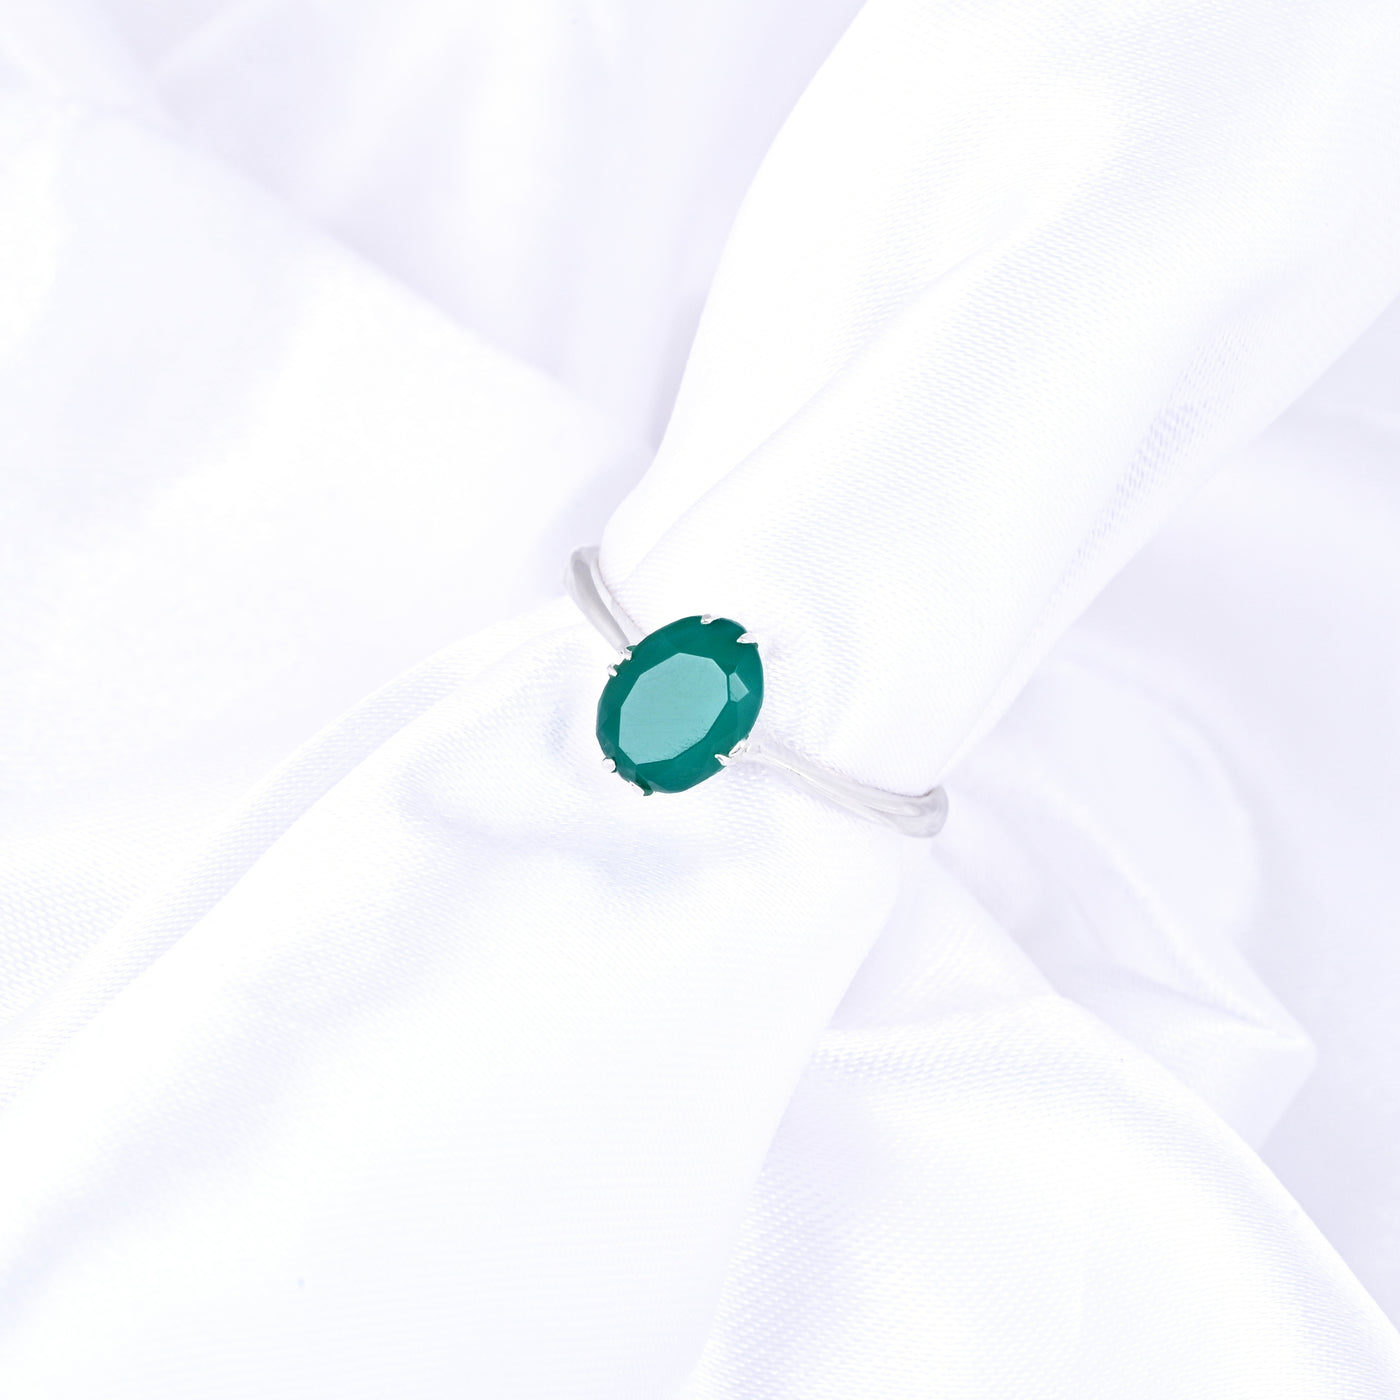 Dainty Oval Cut Emerald Stacking Ring